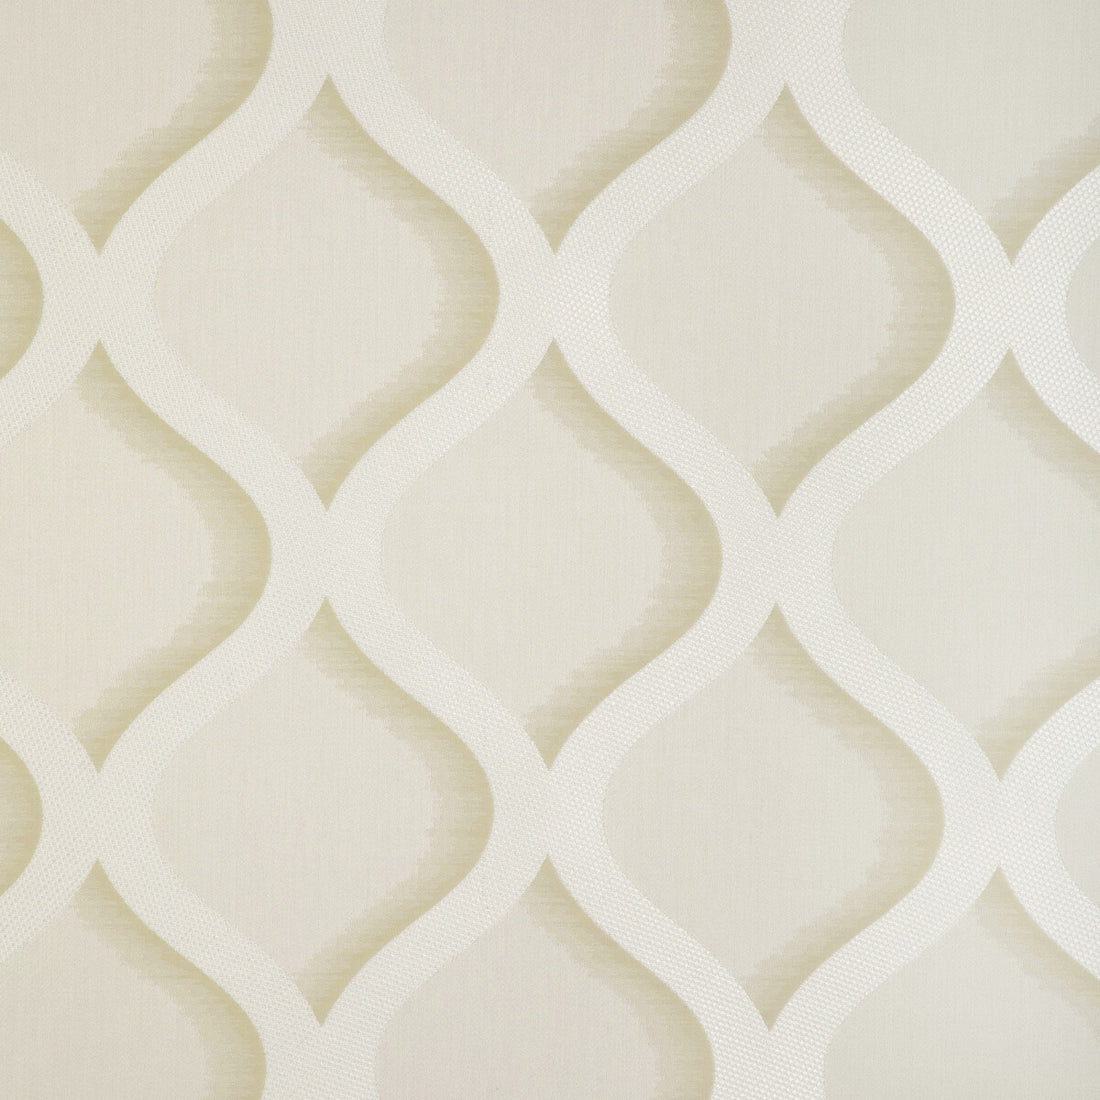 Shadow Boxer fabric in cream color - pattern 36789.16.0 - by Kravet Design in the Candice Olson collection